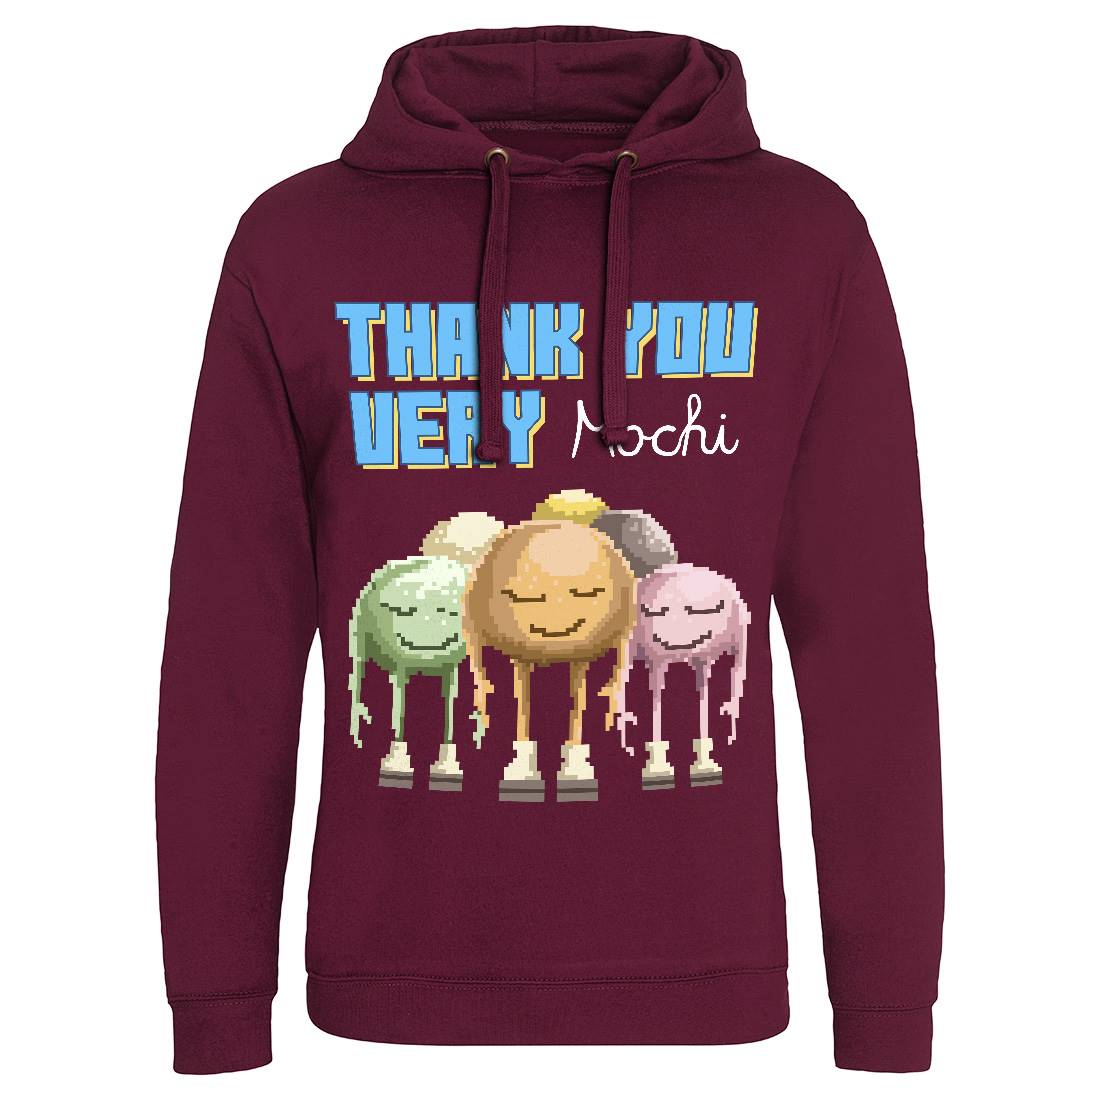 Thank You Very Mochi Mens Hoodie Without Pocket Food B966